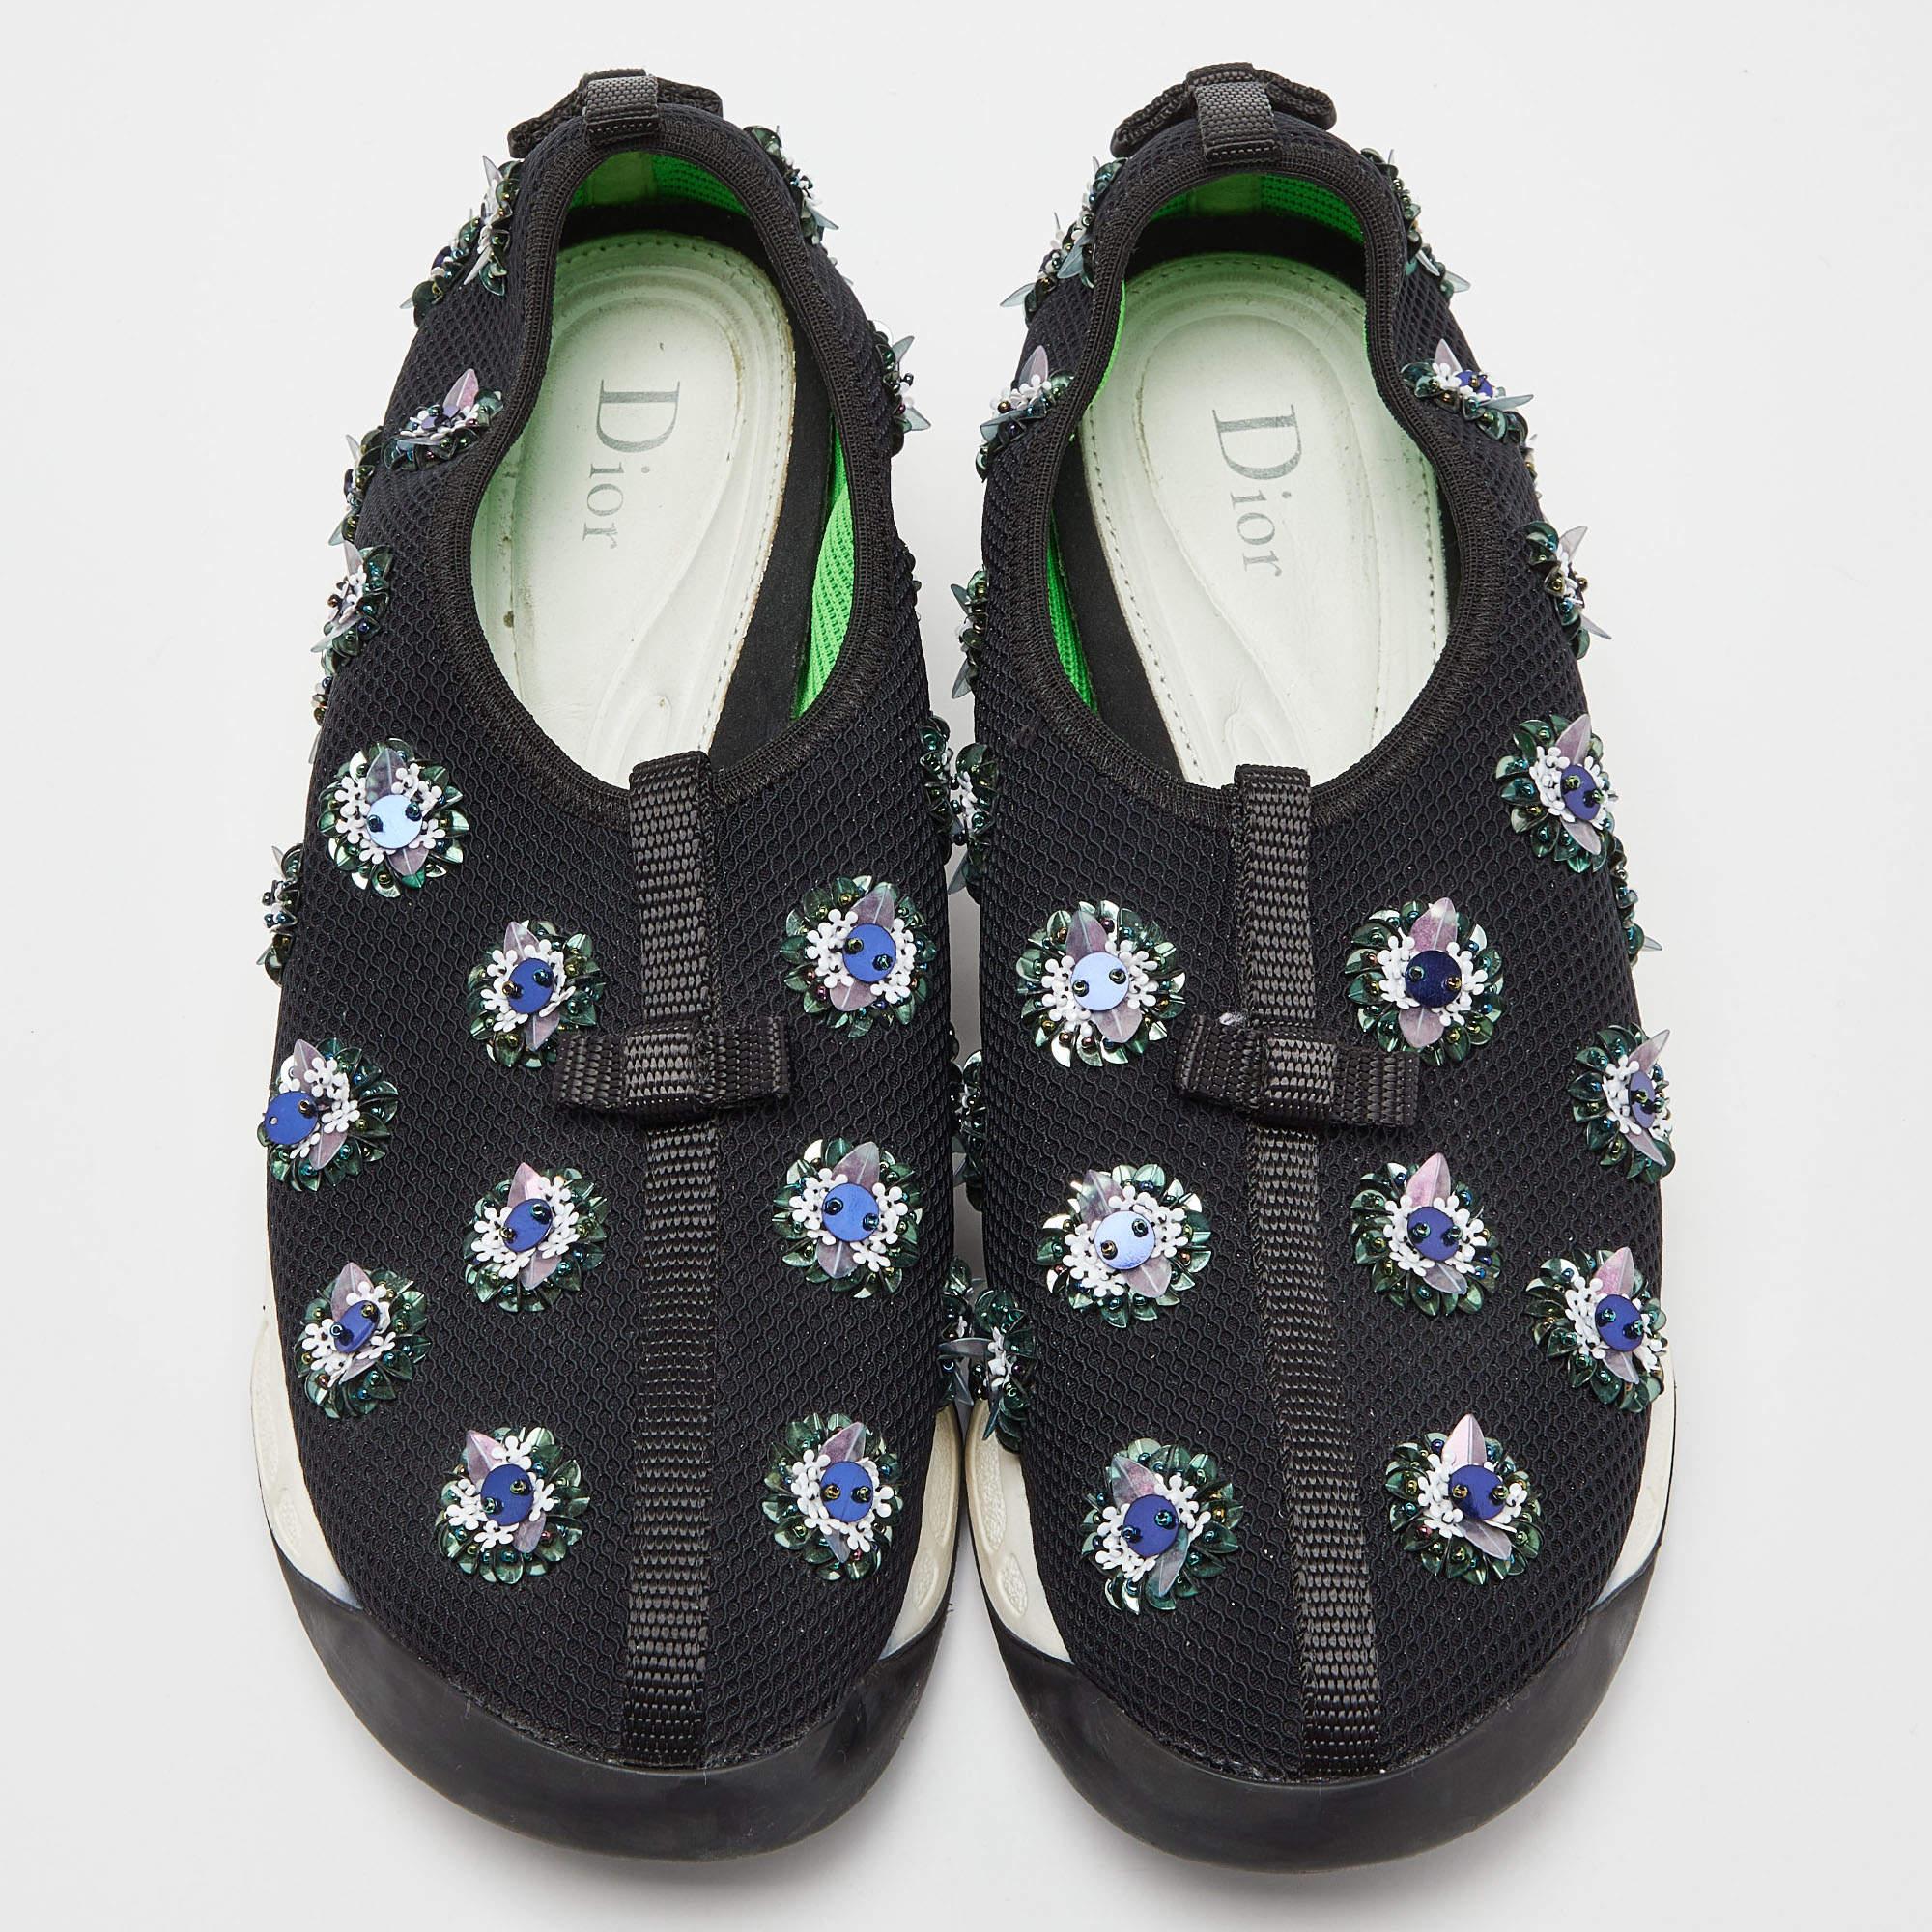 Dior Black Mesh Fusion Floral Embellished Slip On Sneakers Size 39.5 In Fair Condition For Sale In Dubai, Al Qouz 2